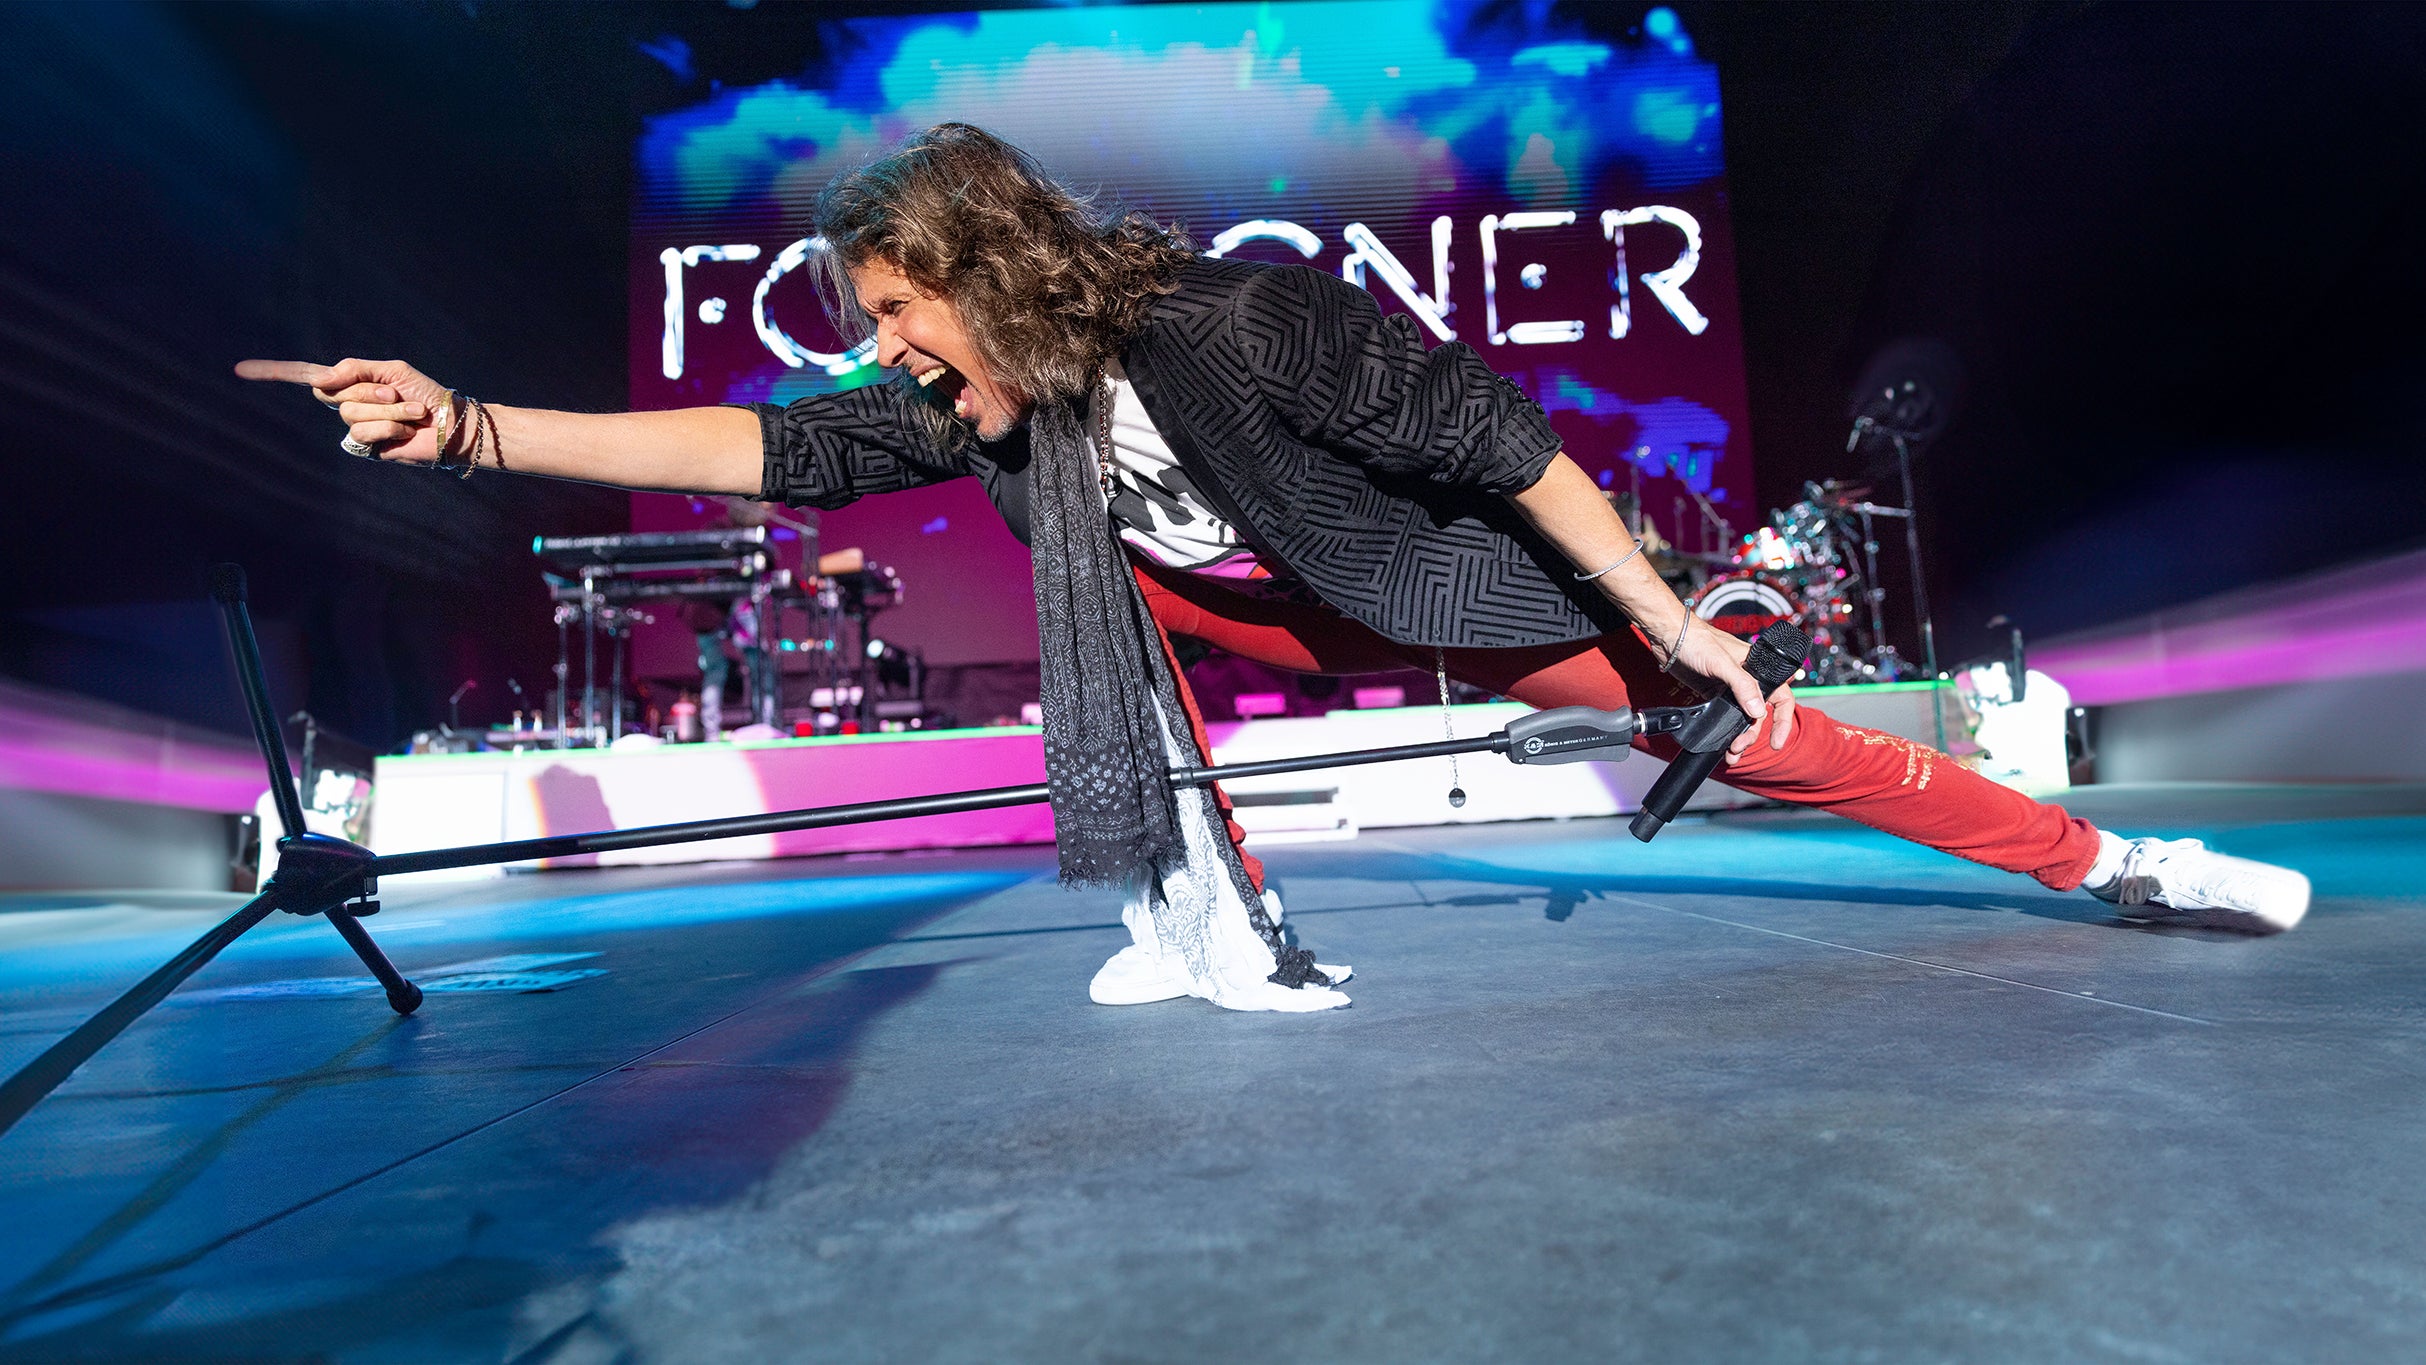 Foreigner: Farewell Canada free presale code for concert tickets in Winnipeg, MB (Canada Life Centre)